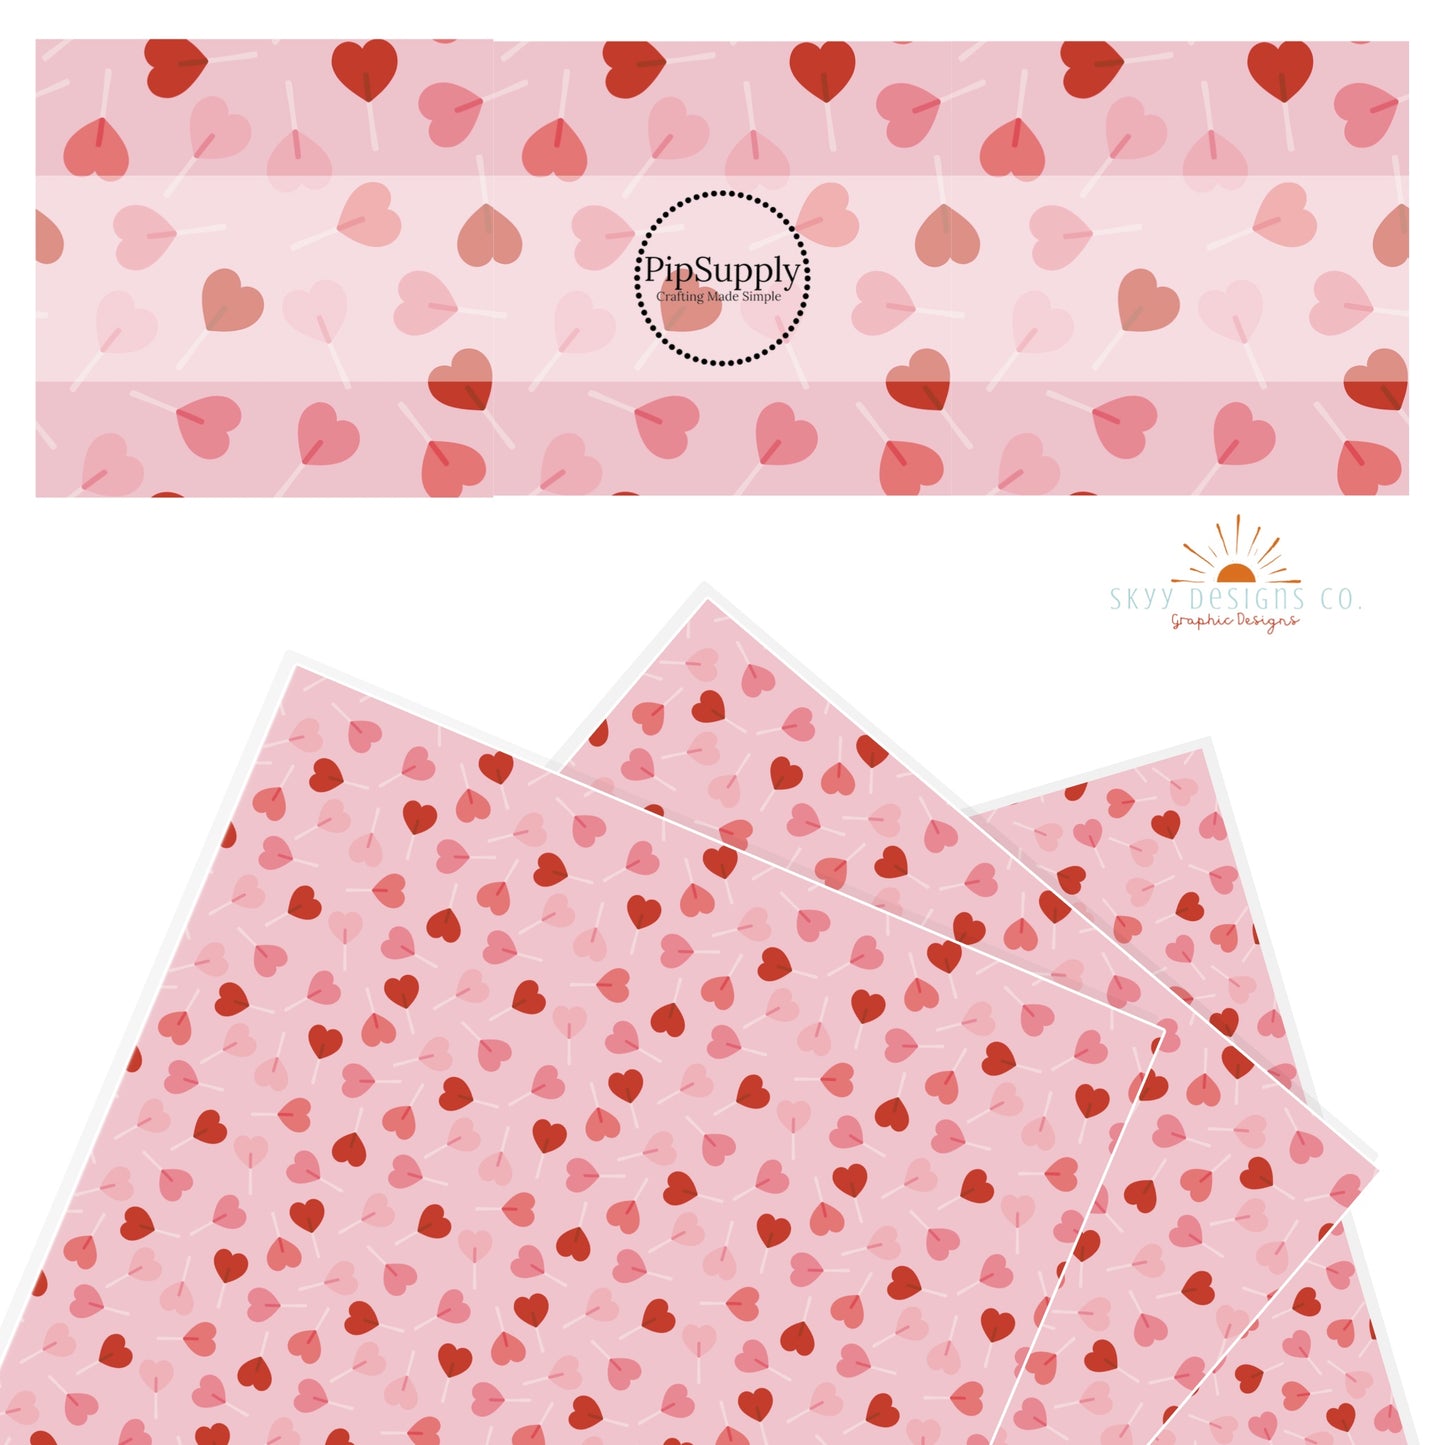 Pink candy hearts on pink faux leather sheets